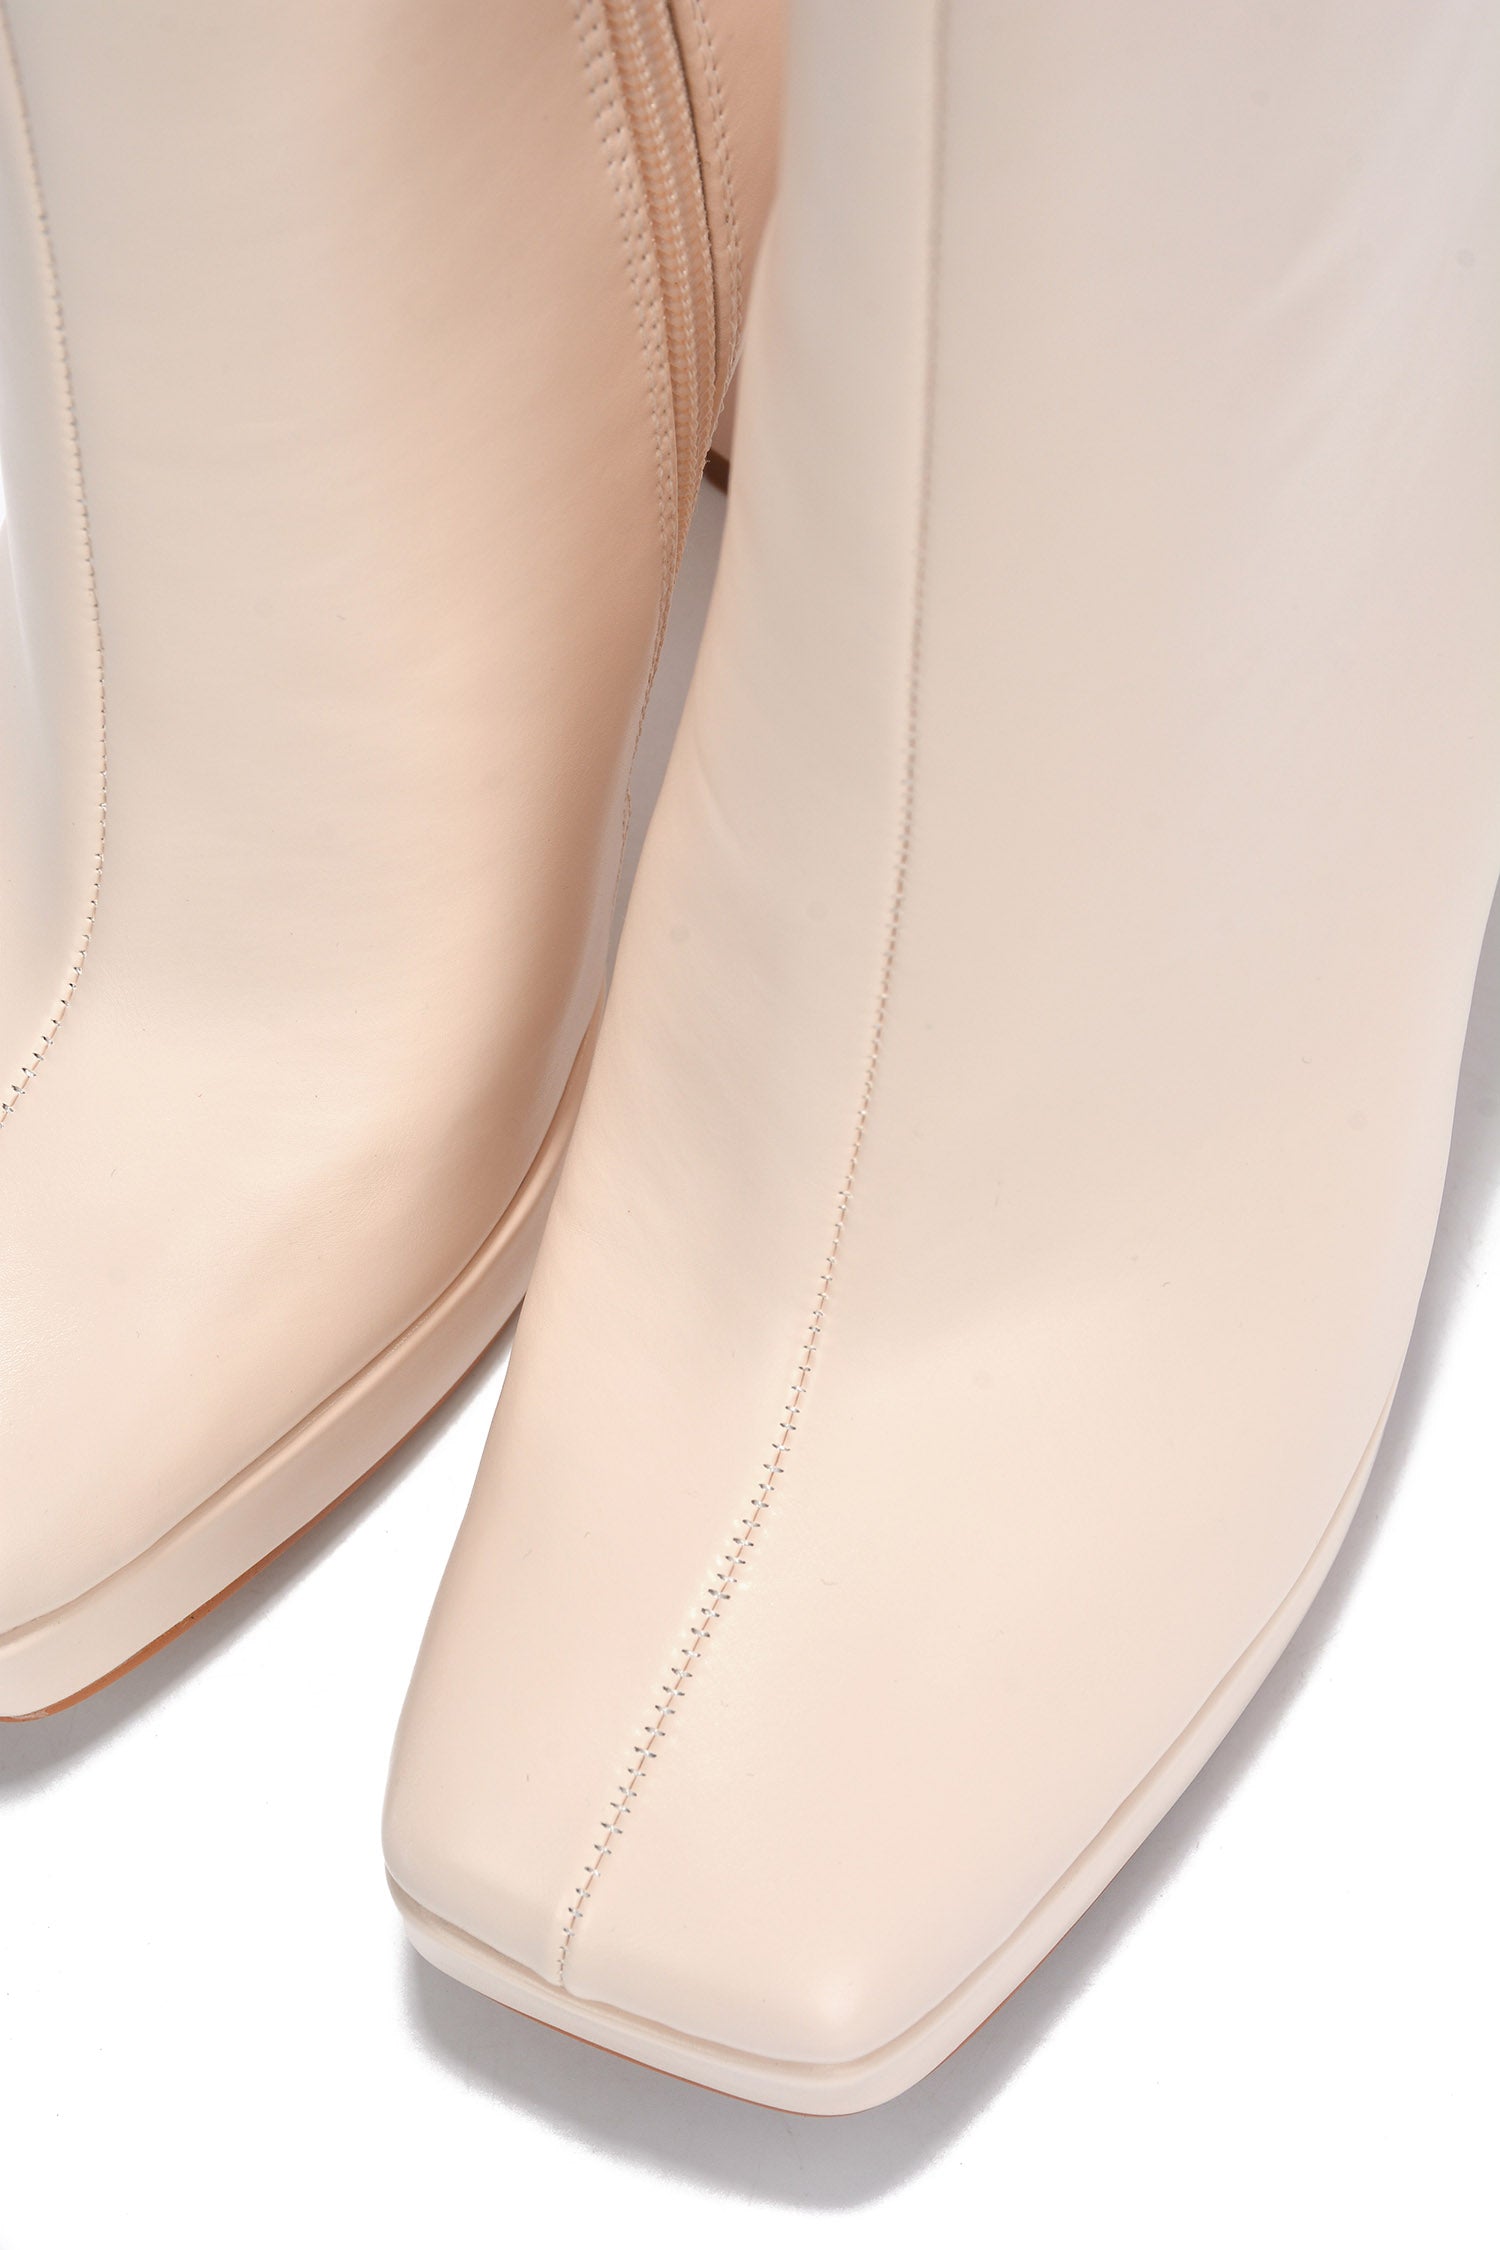 Cape Robbin - TRUDY - IVORY - BOOTIES